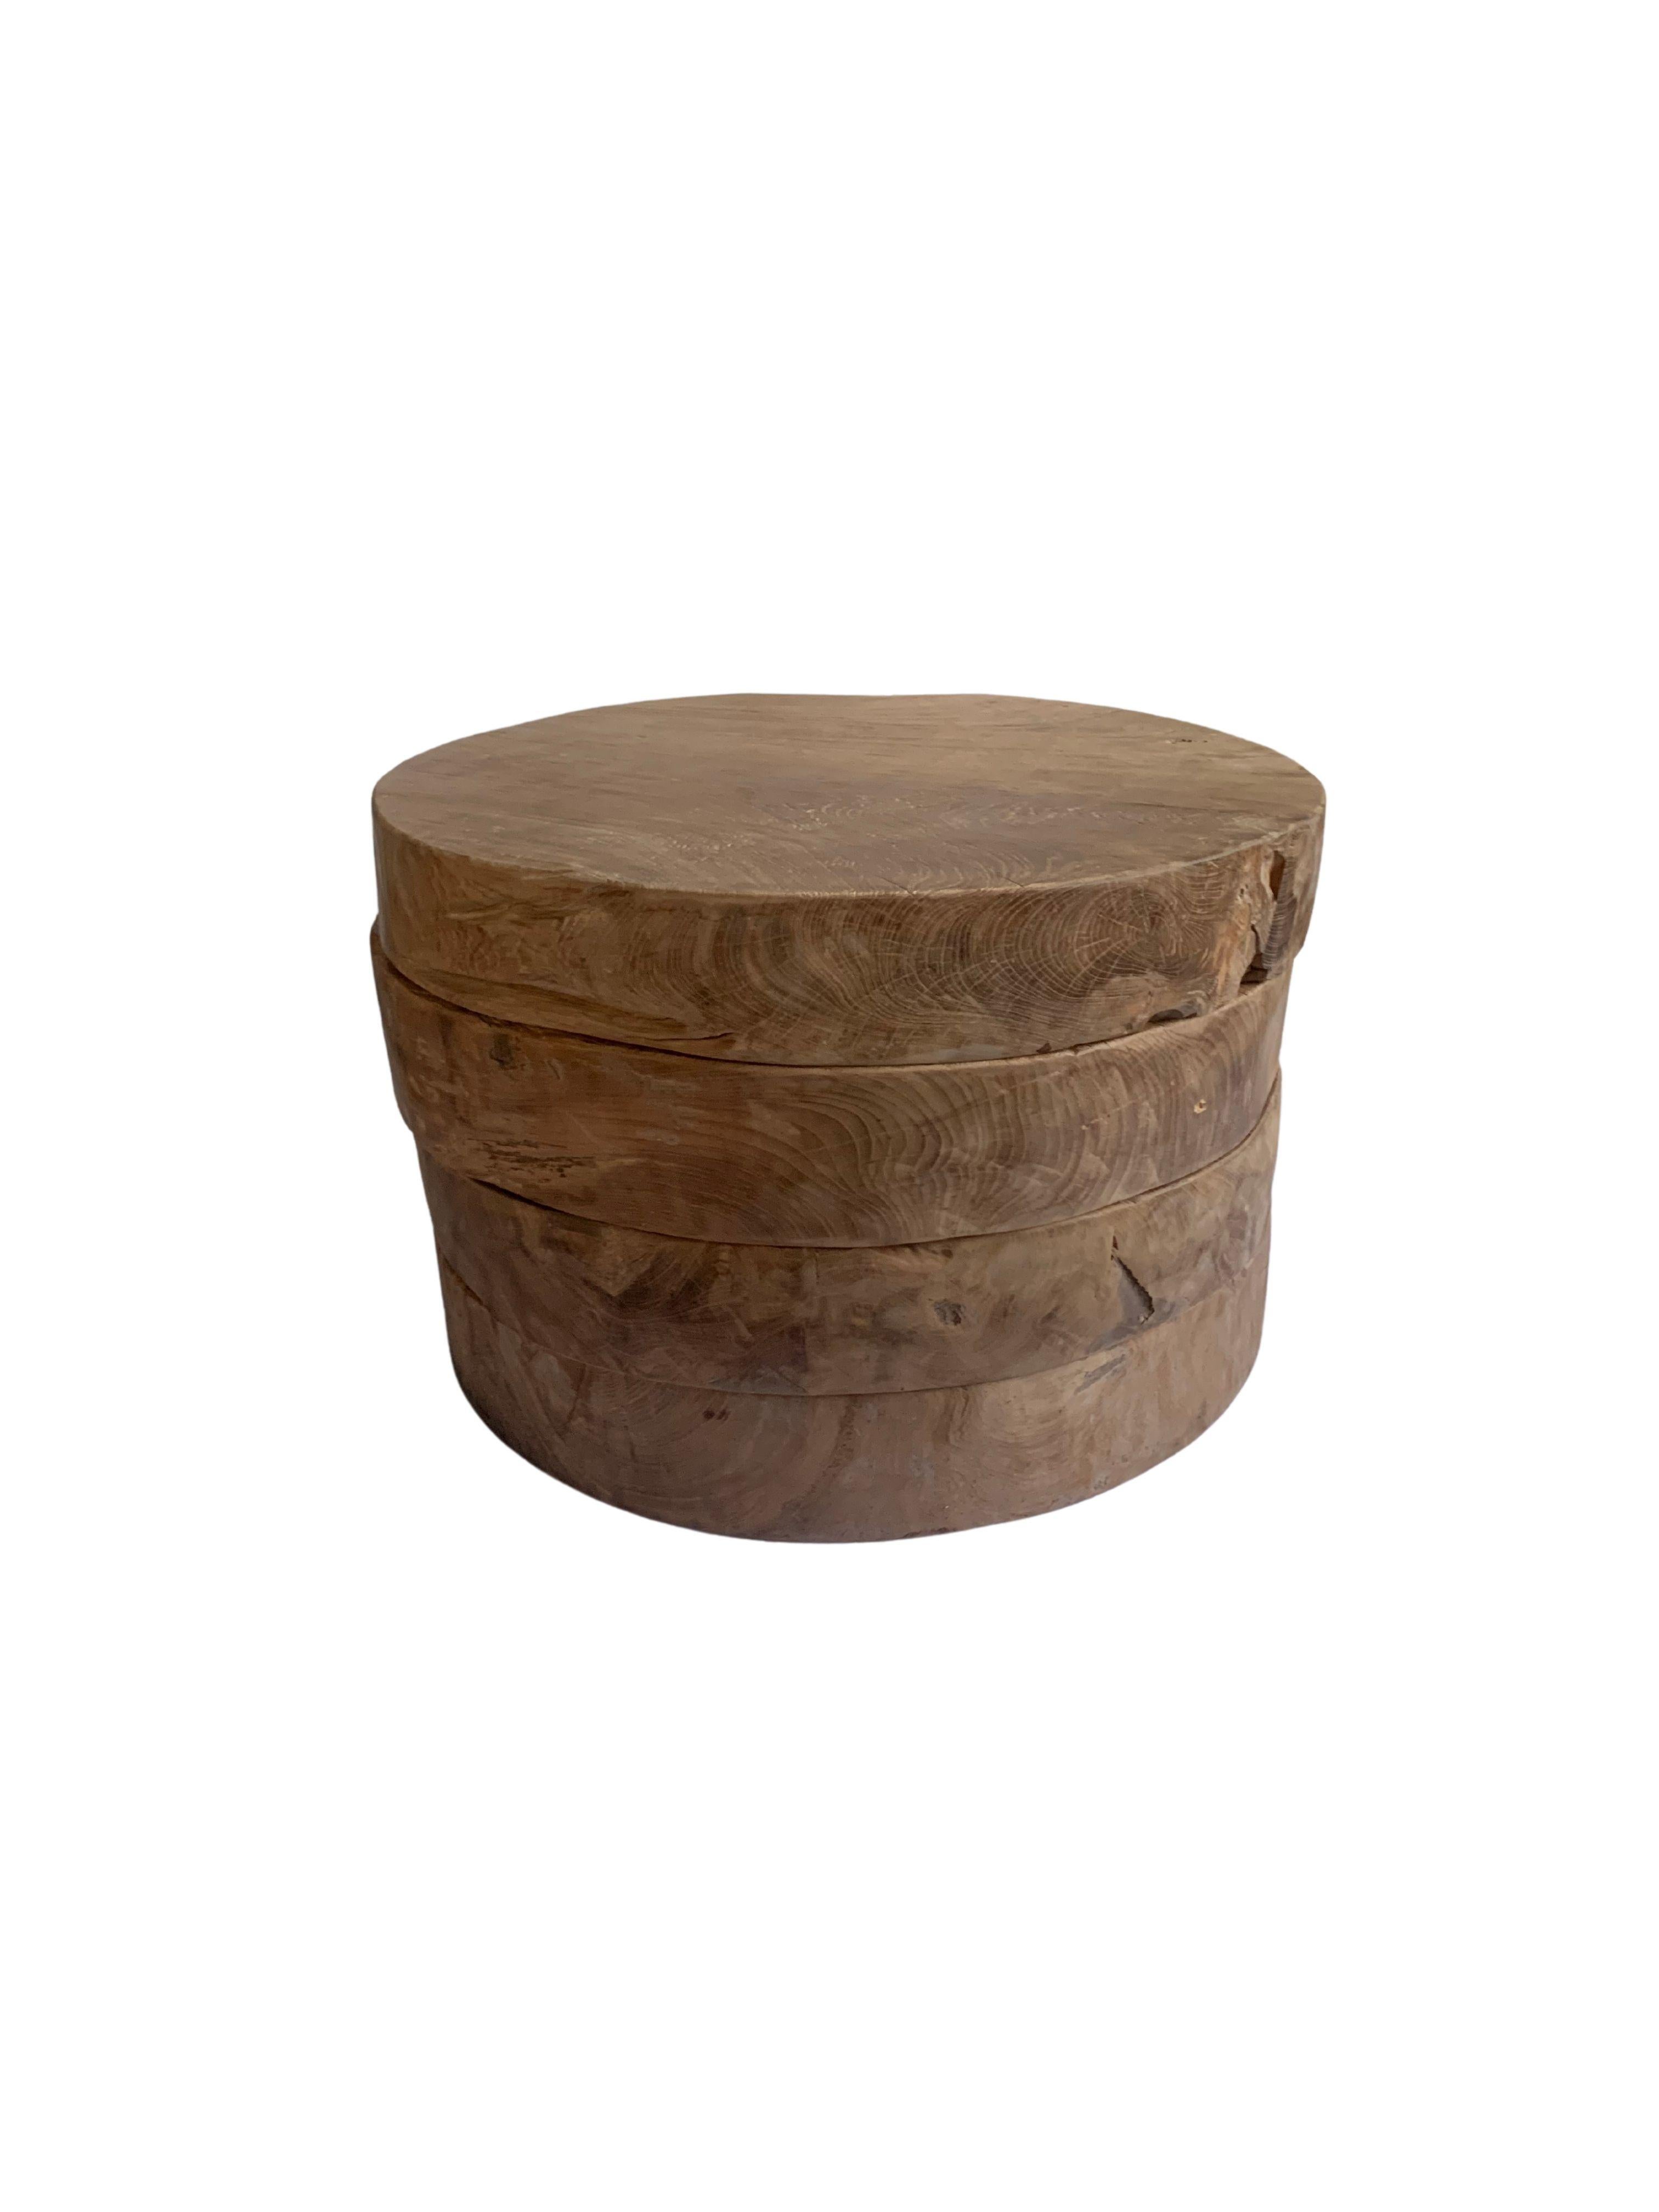 This side table is formed by four stacked round & solid teak wood slabs. A wonderfully sculptural round side table. Its neutral pigment and subtle wood texture makes it perfect for any space. Each slab is solid and heavy allowing for the table to